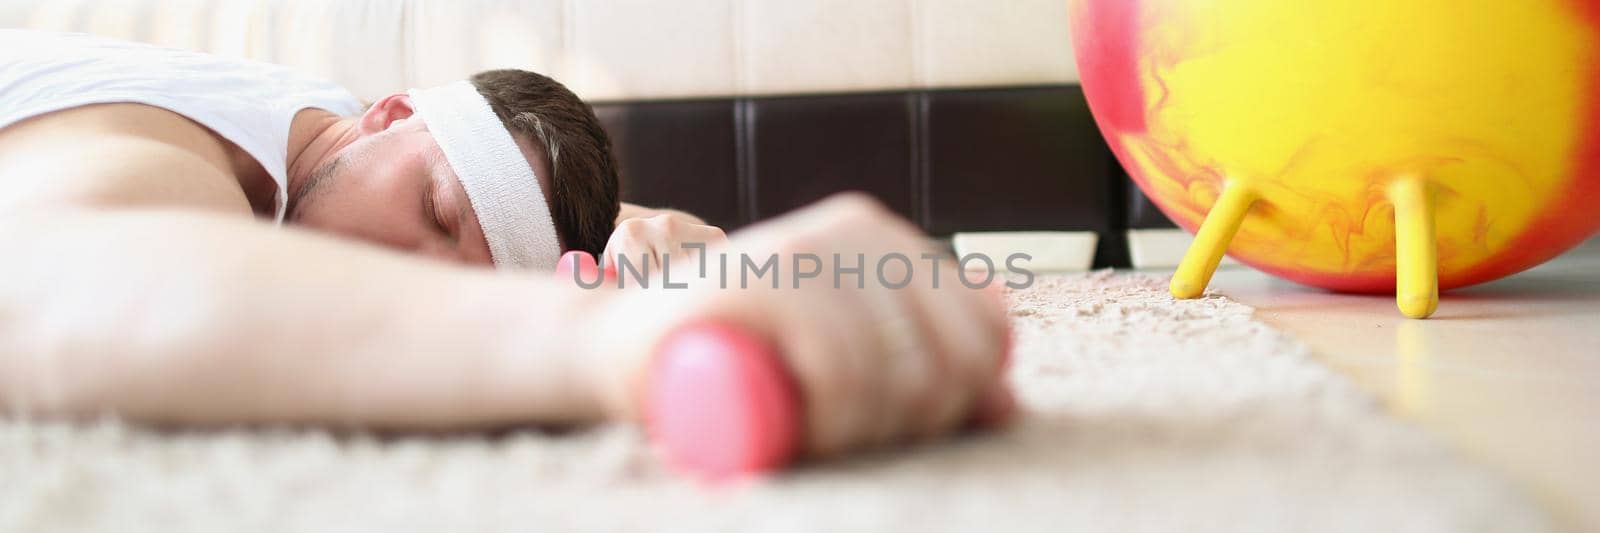 Tired man laying on carpet floor with dumbbell equipment in hand by kuprevich